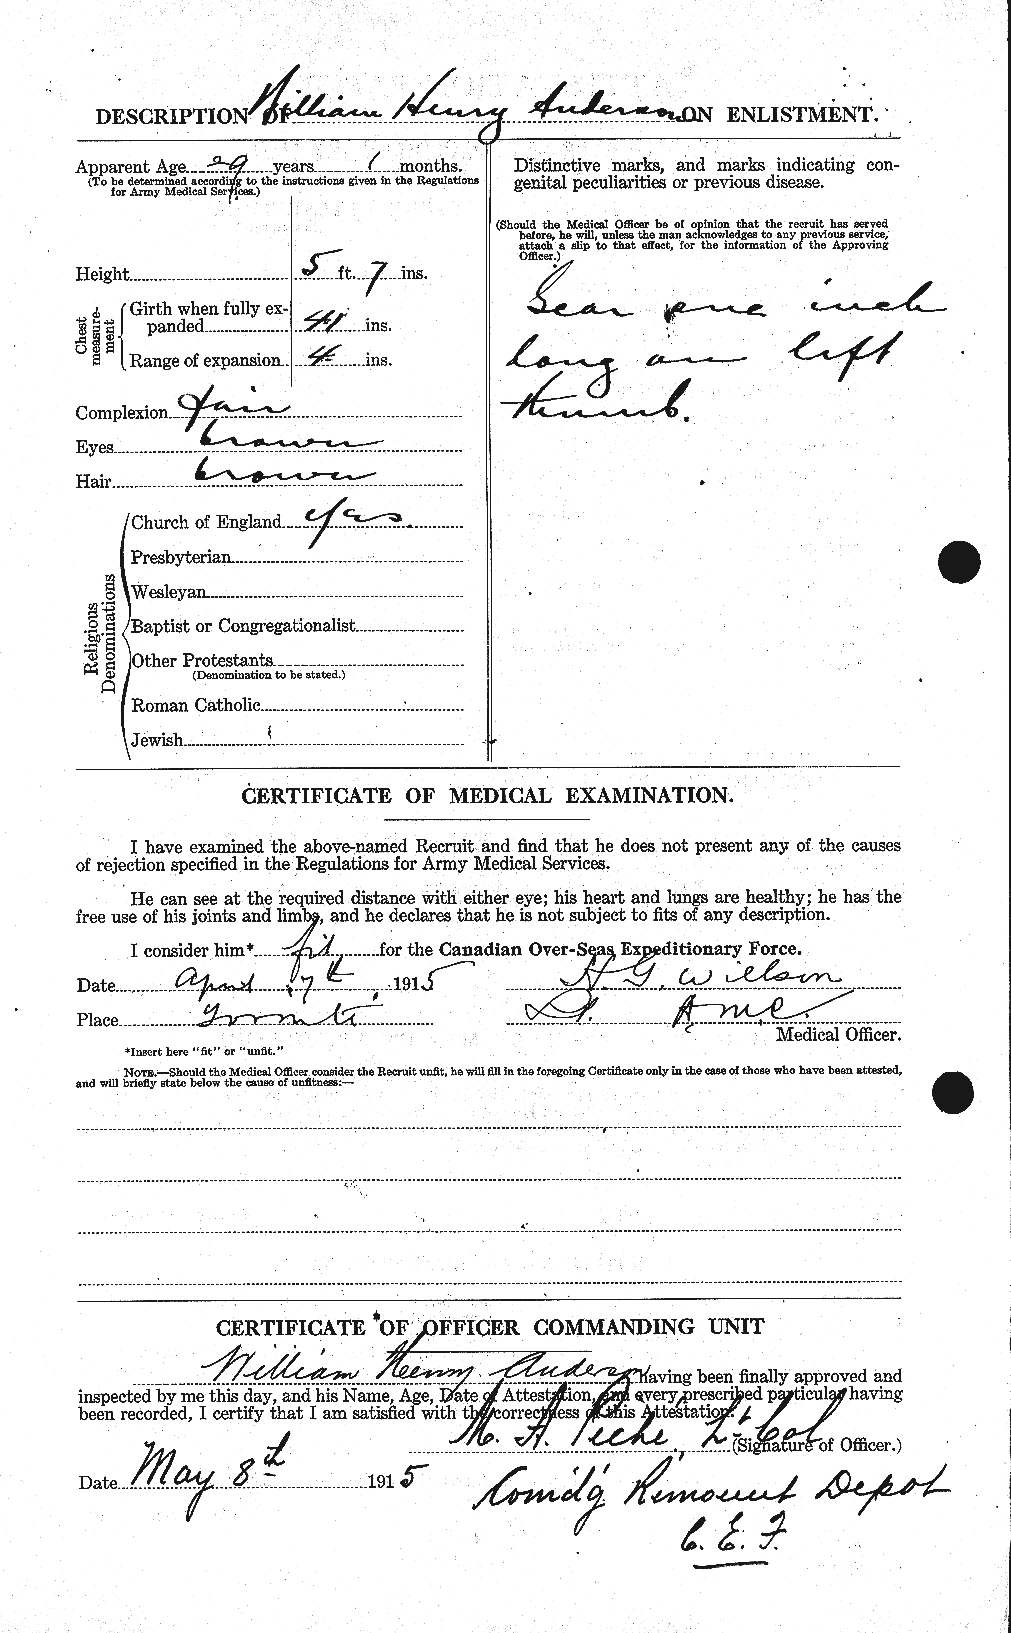 Personnel Records of the First World War - CEF 210715b